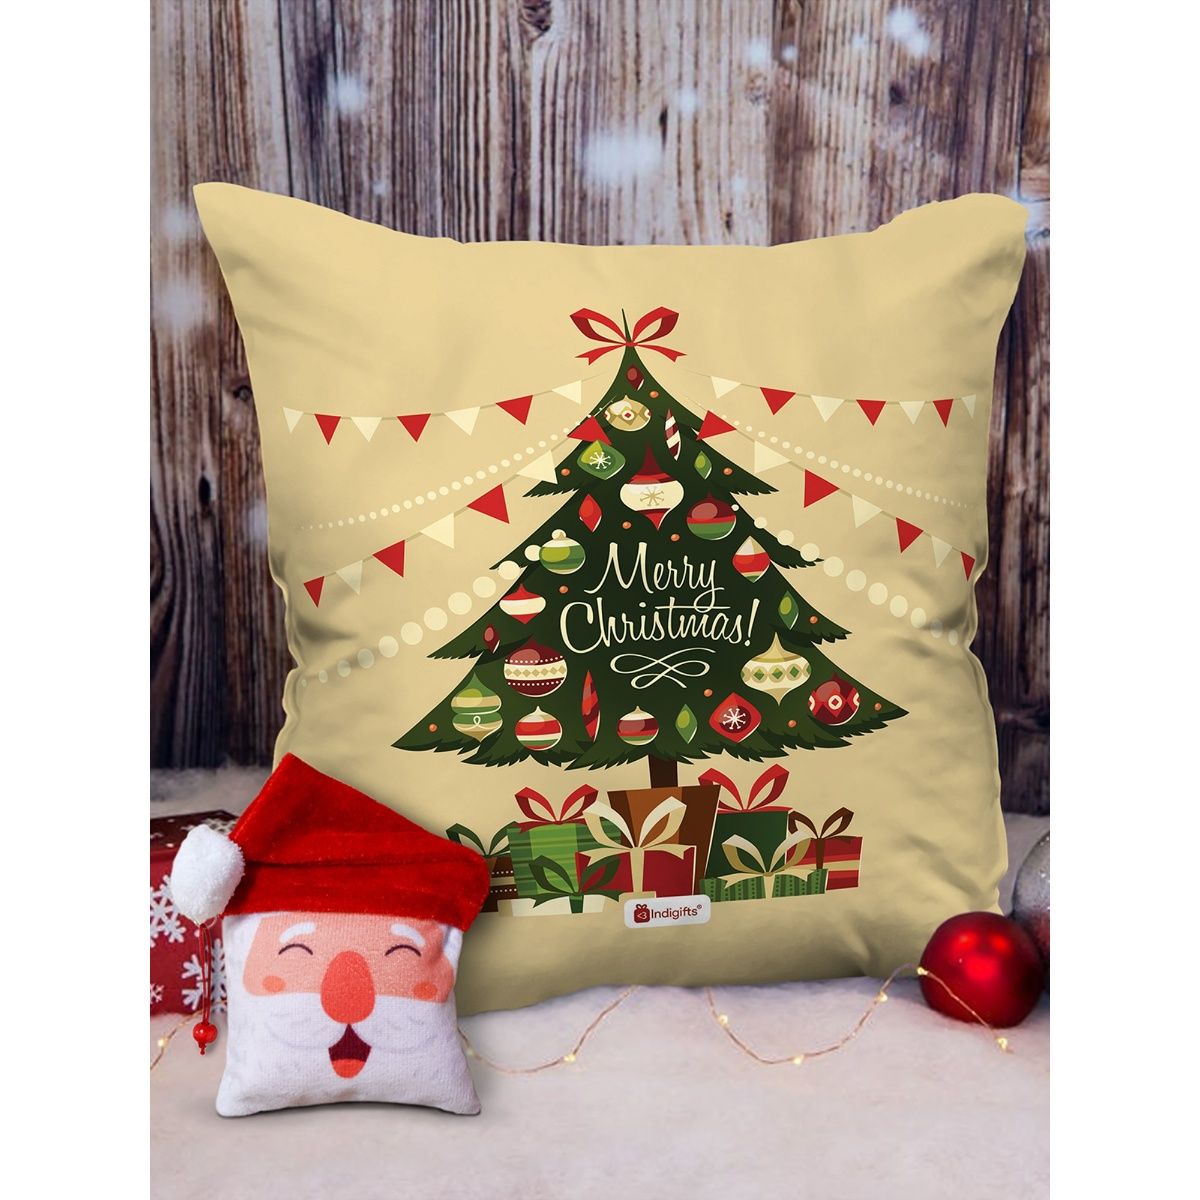 Indigifts Christmas Tree Print Cushion Cover 12x12 with Filler and ...